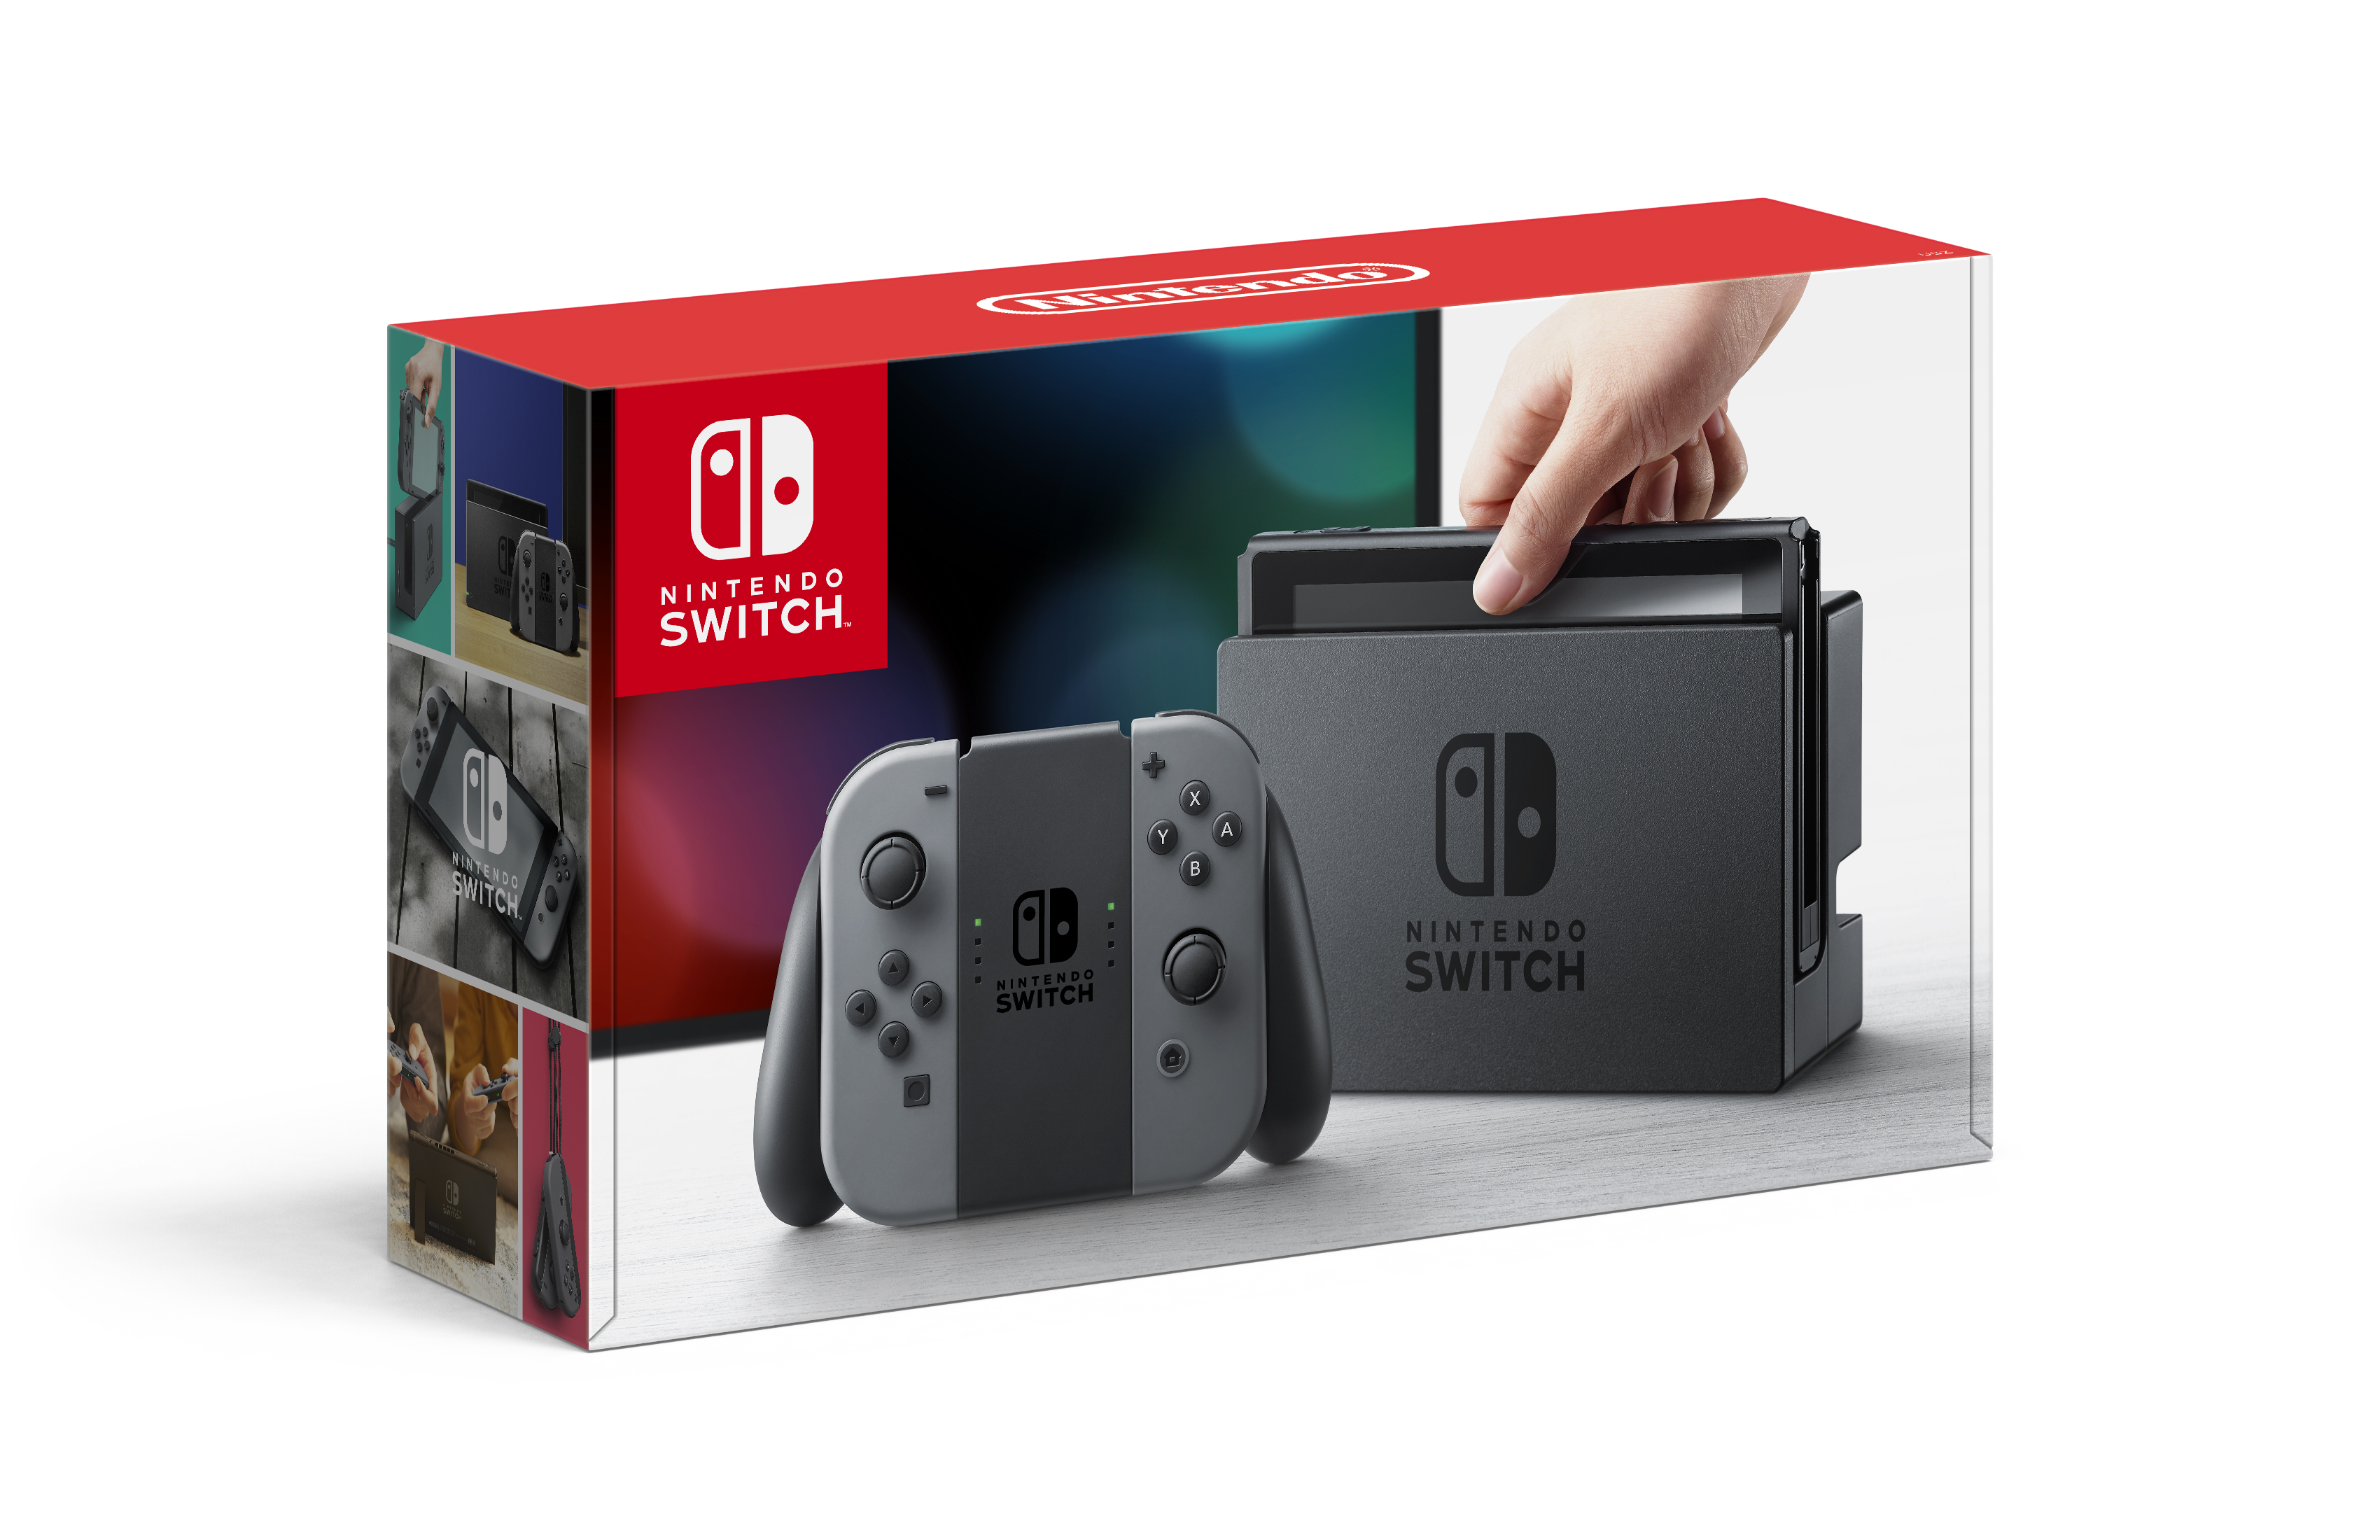 Nintendo Switch Console with Gray Joy-Con (Old Model) - image 1 of 11